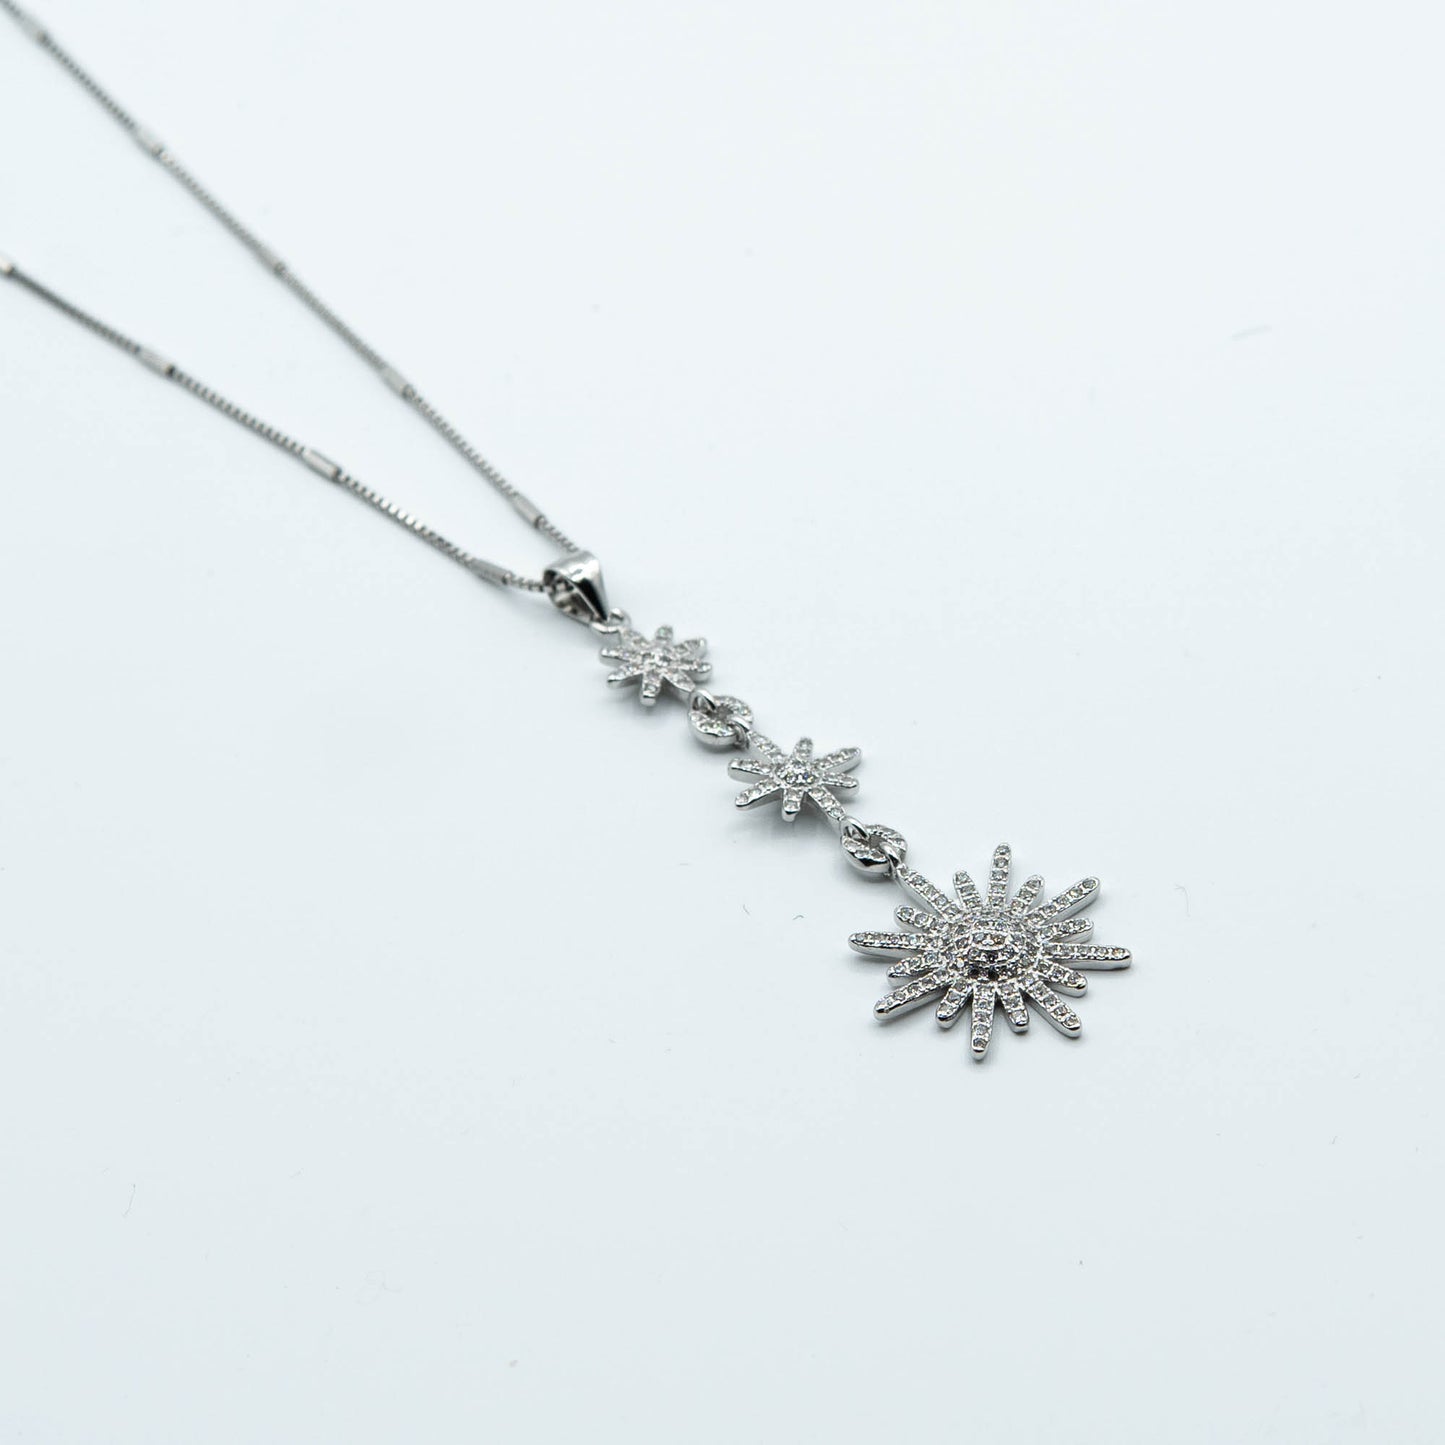 DK-925-452 three pending snow flakes necklace